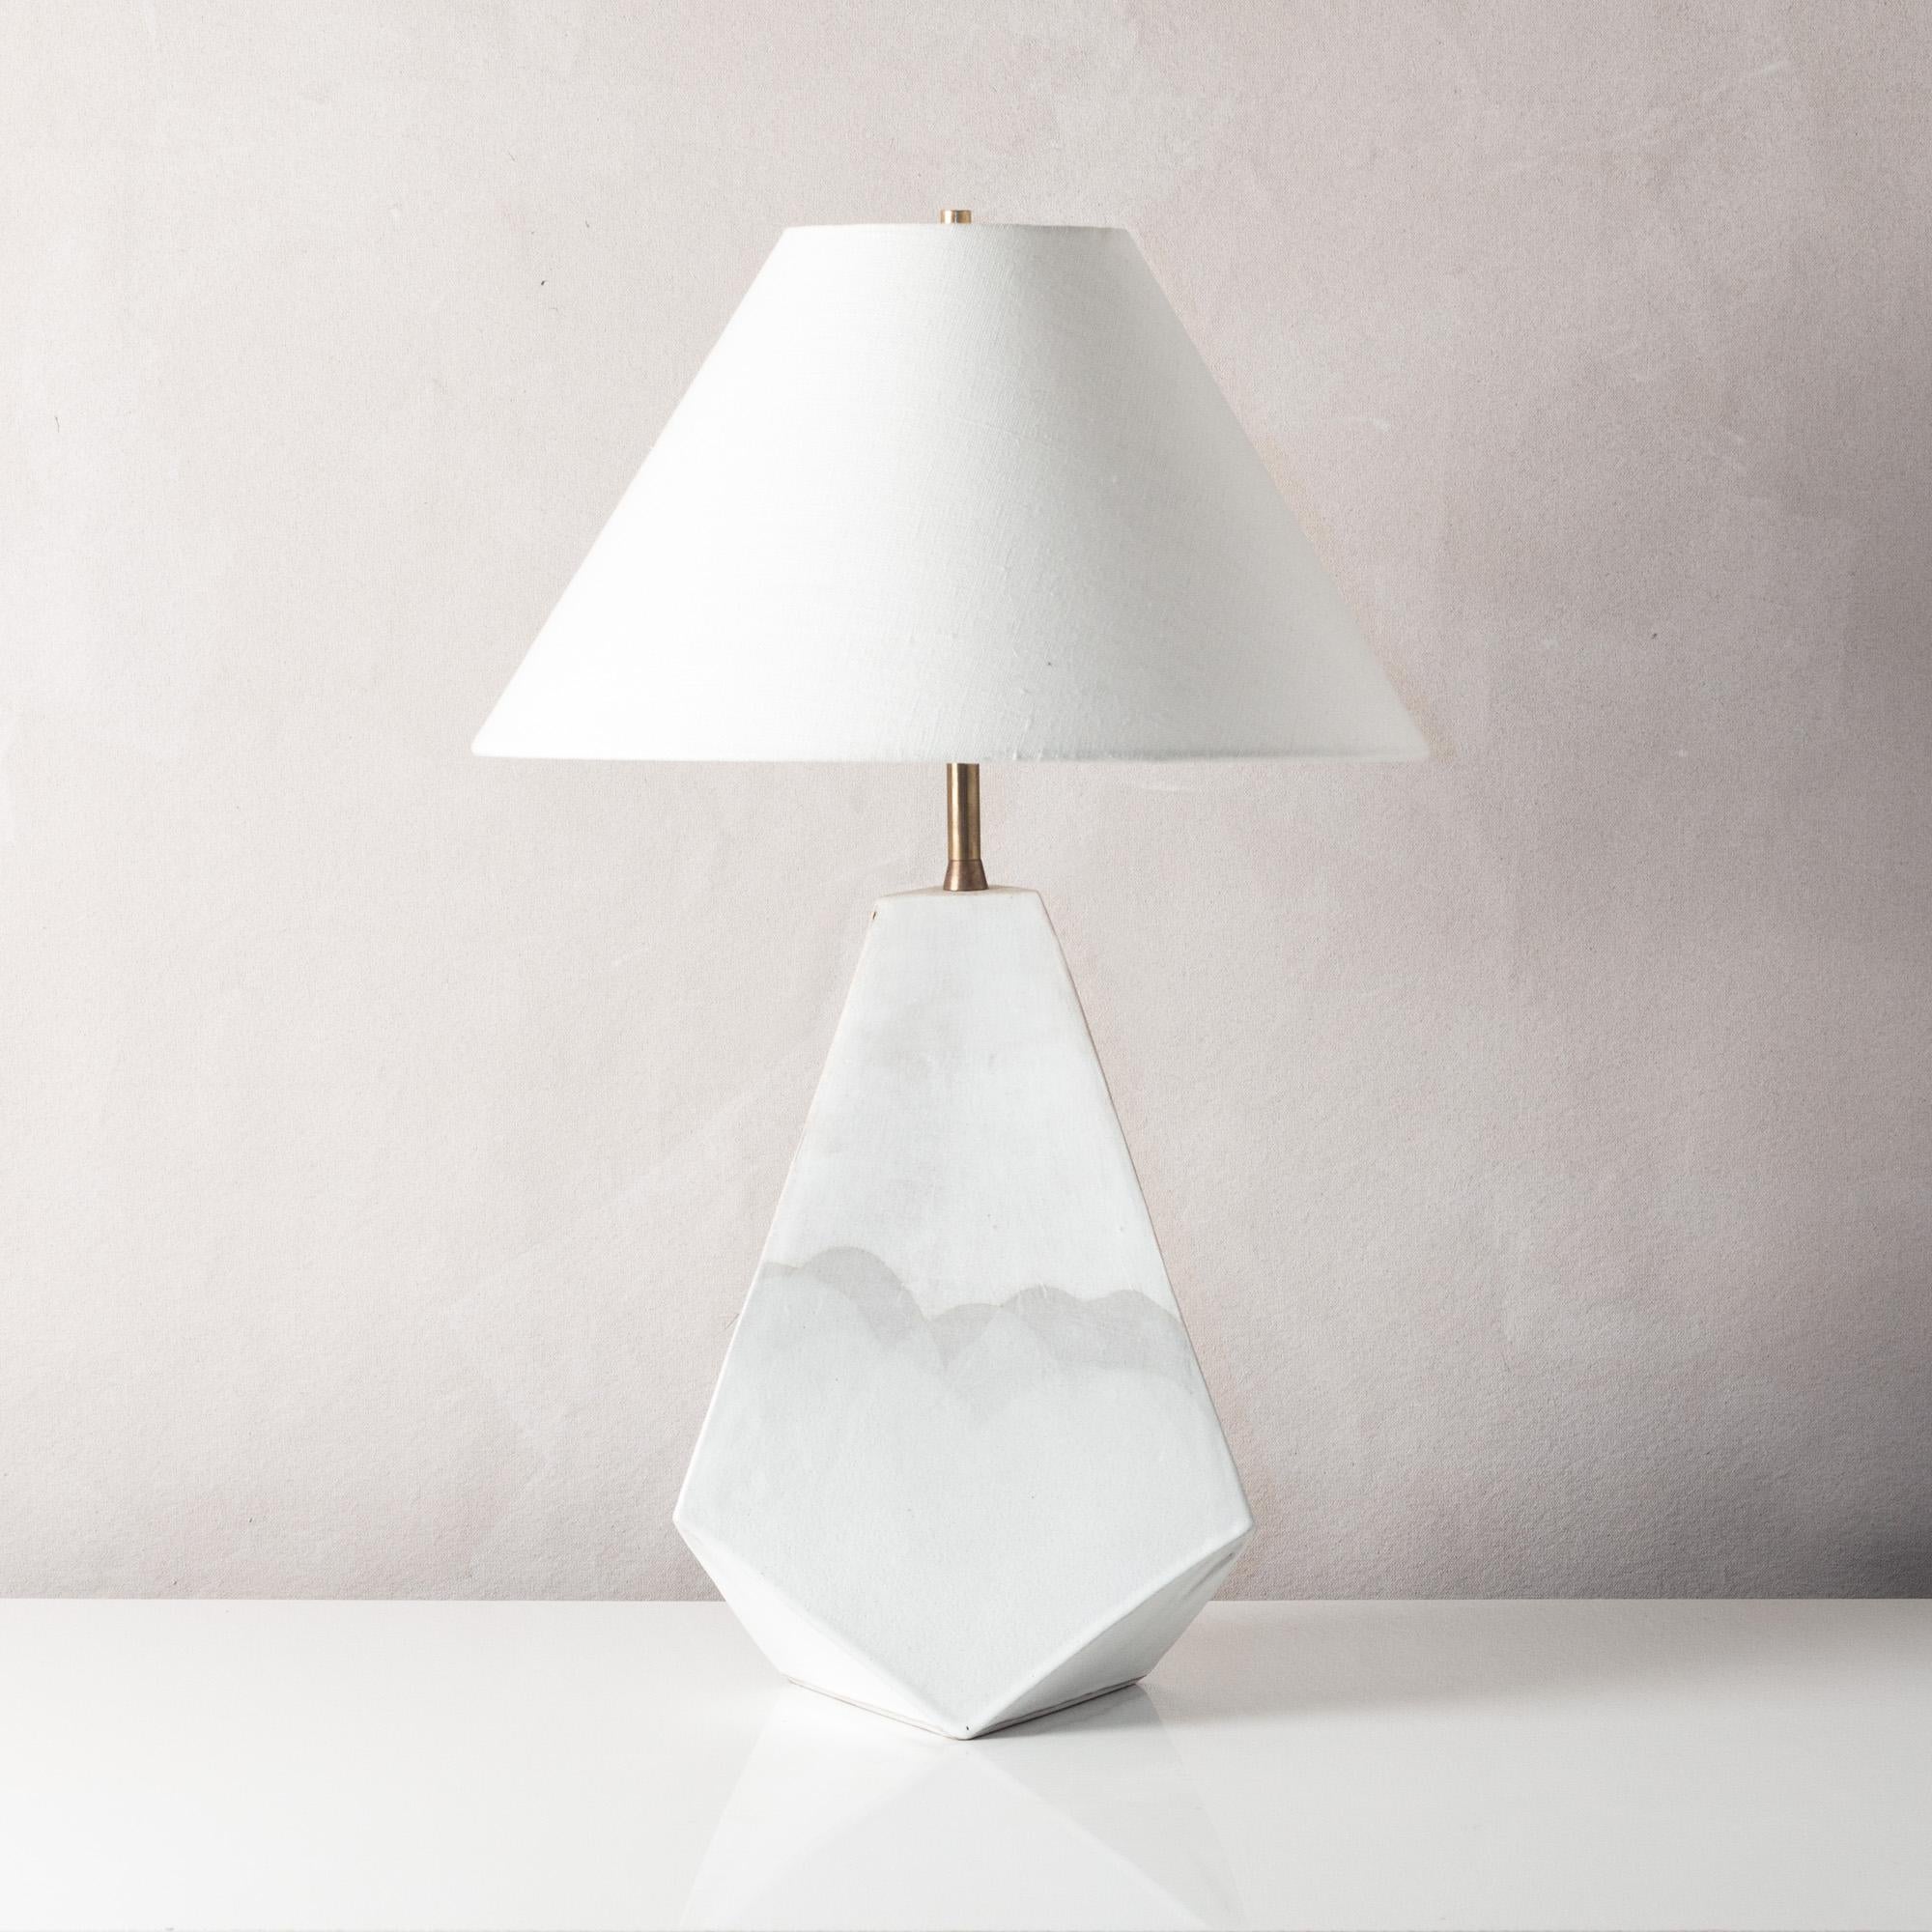 This bold geometric ceramic lamp is made from a rich red-brown clay, formed into a dramatic pyramid shape, and featuring an organic matte finish accented by hand-poured satin glaze. Each piece is individually handmade and entirely